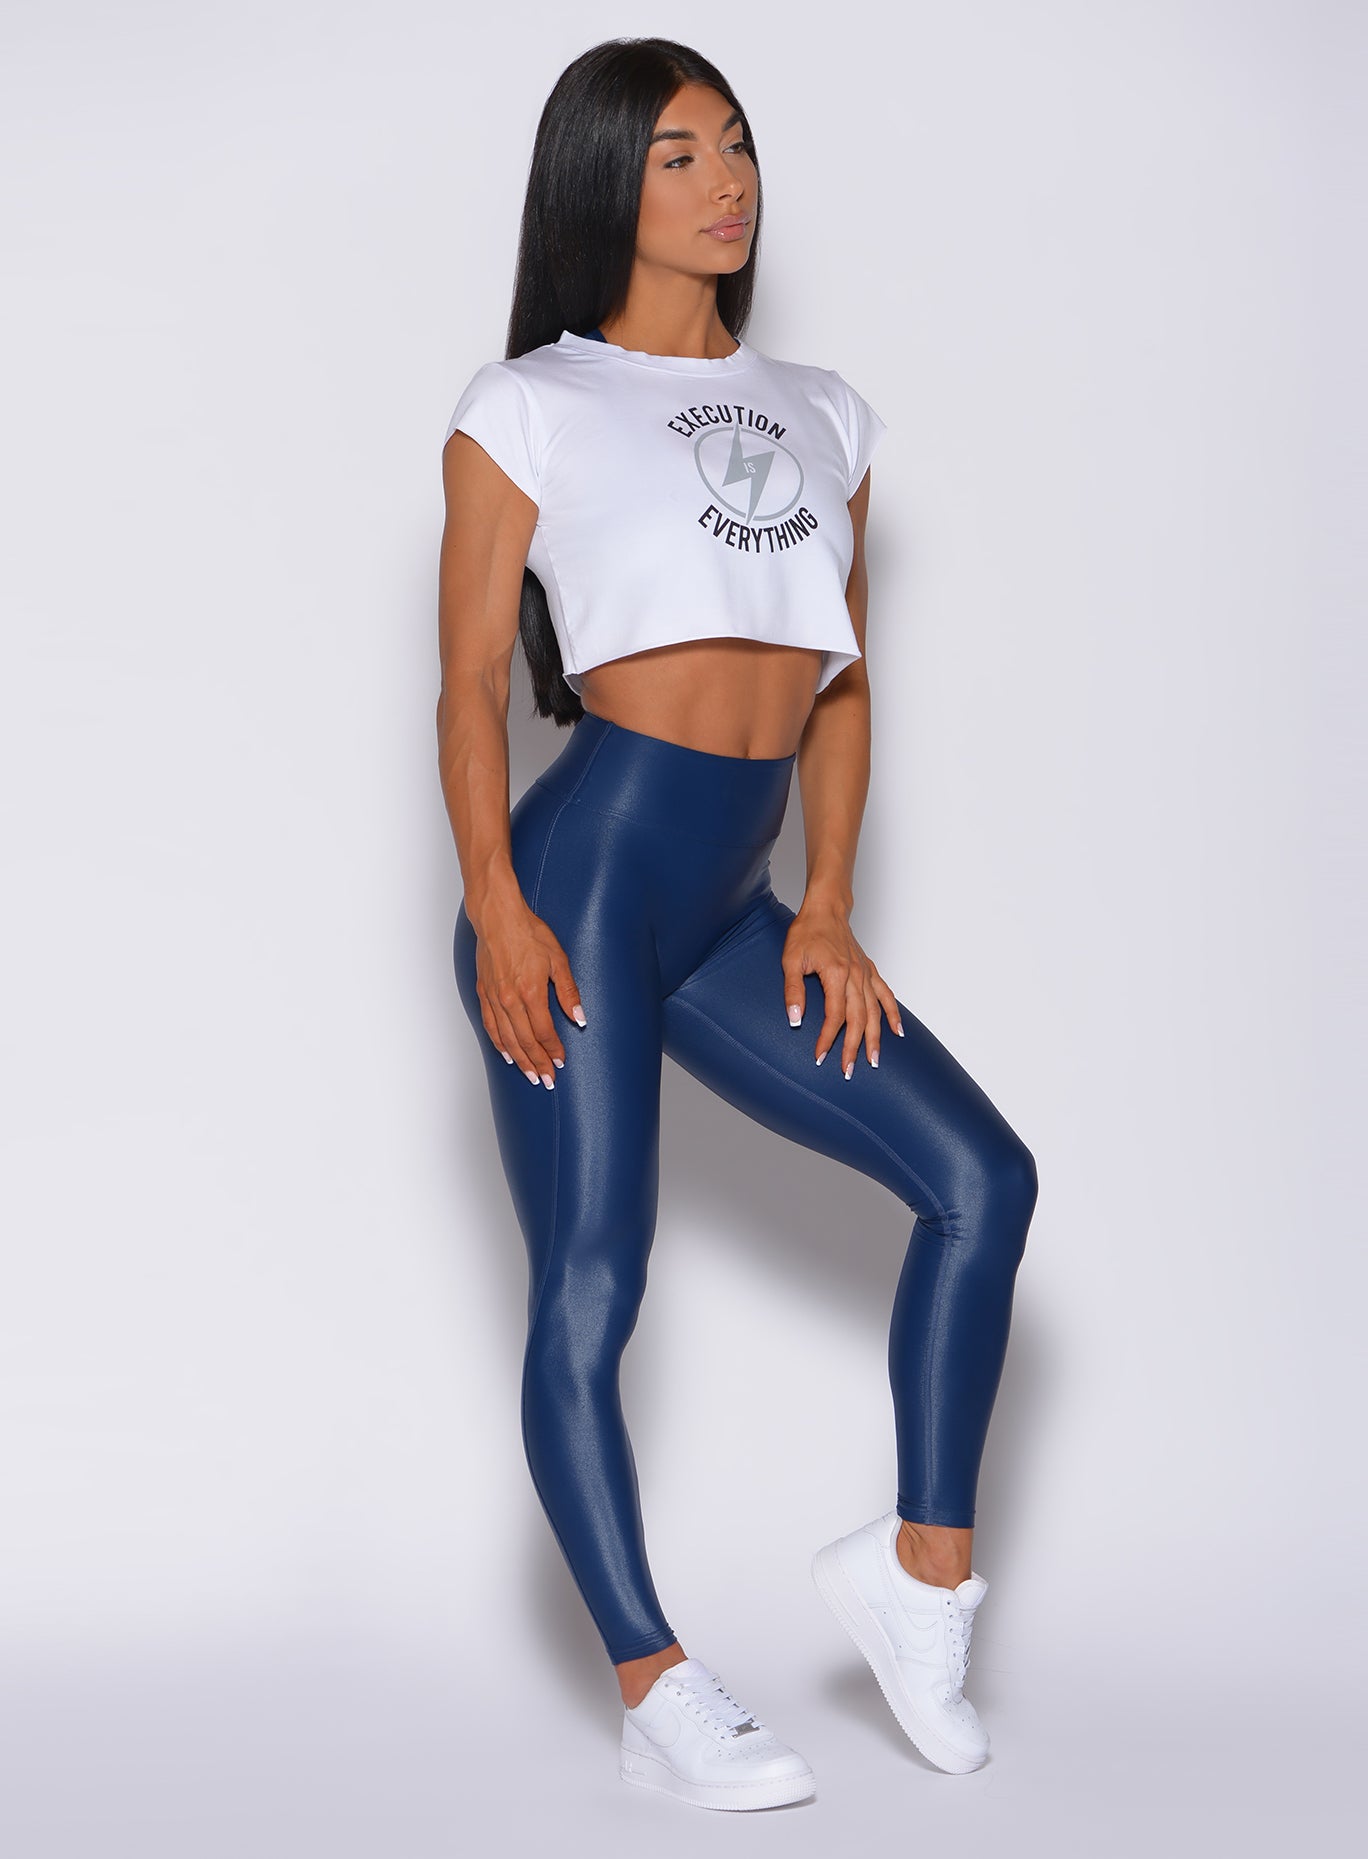 Right side profile view of a model wearing the white execution tee and a navy gloss leggings